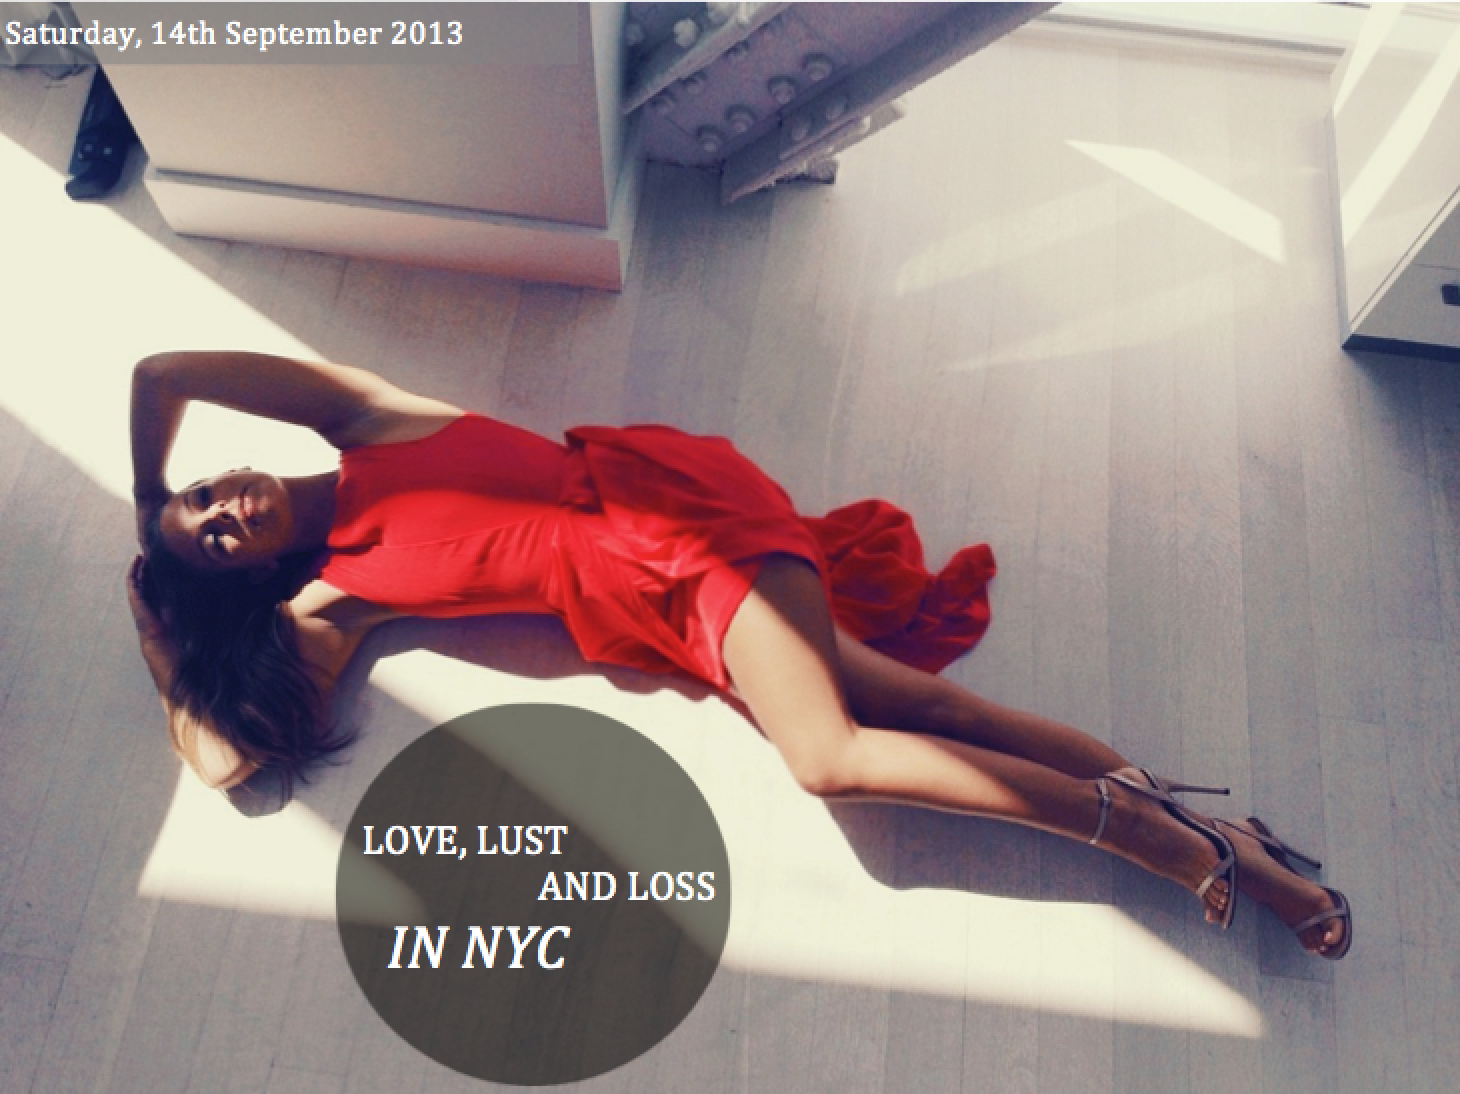 LOVE, LUST AND LOSS IN NYC